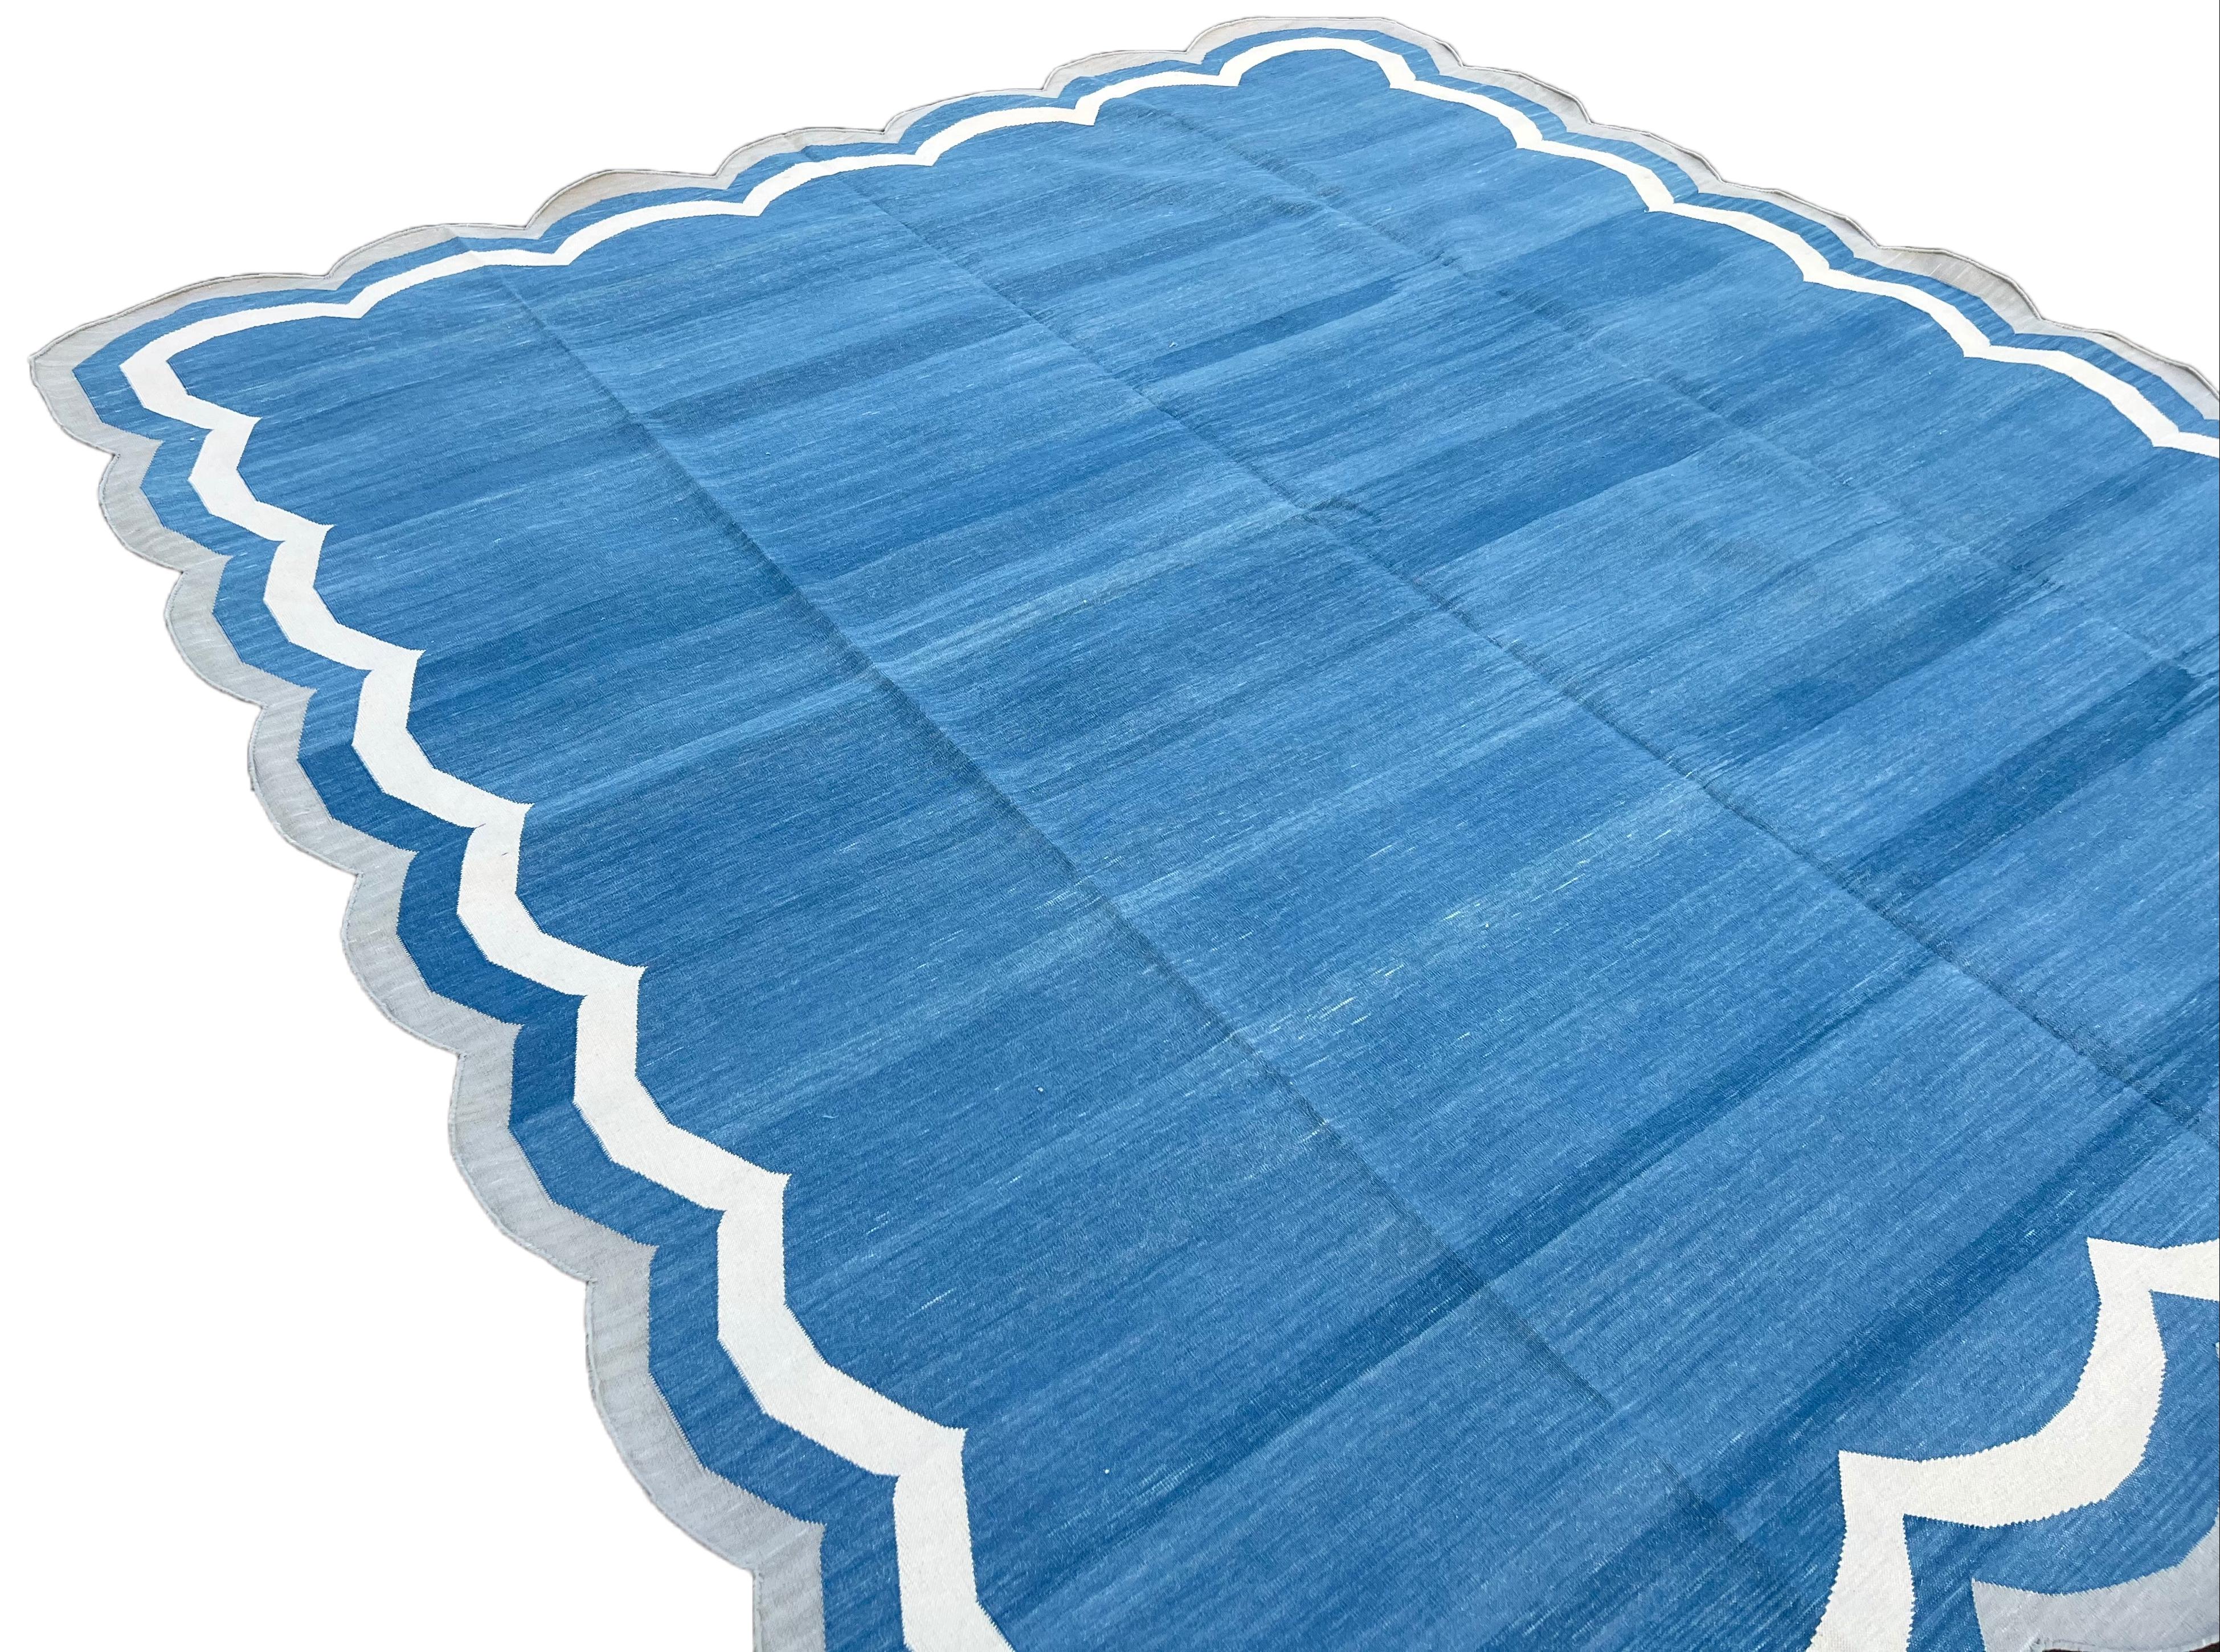 Mid-Century Modern Handmade Cotton Area Flat Weave Rug, 8x10 Blue And Grey Scalloped Stripe Dhurrie